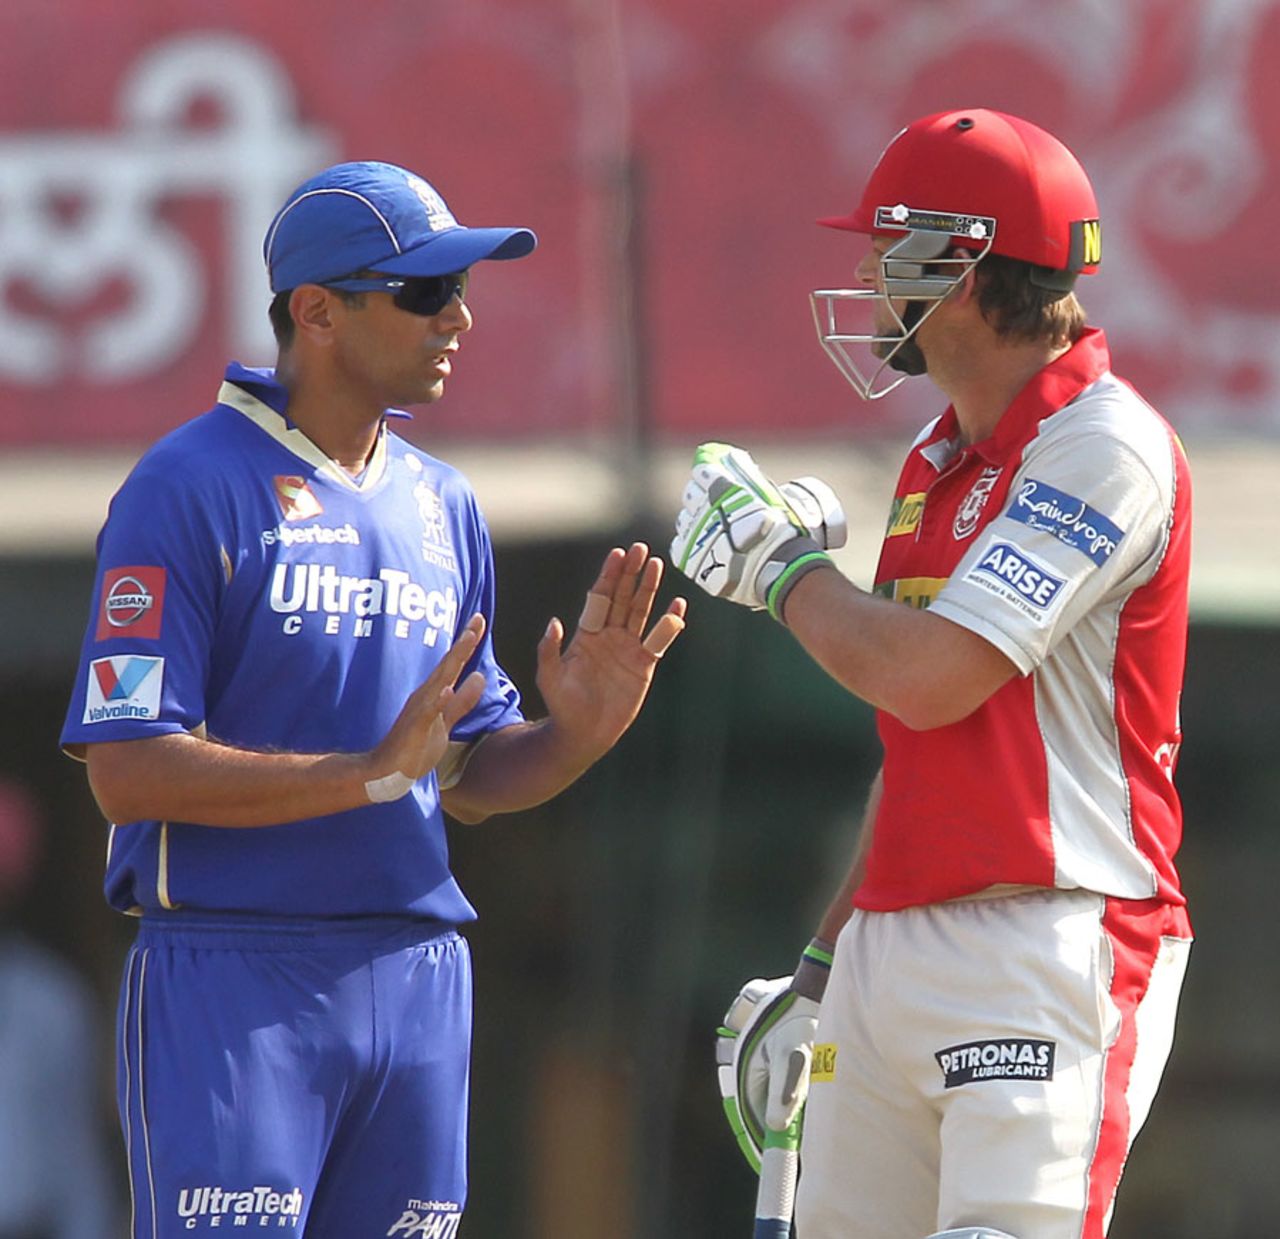 Rahul Dravid calms Adam Gilchrist down after an unsporting appeal from Ajit Chandila, Kings XI Punjab v Rajasthan Royals, IPL, Mohali, May 9, 2013